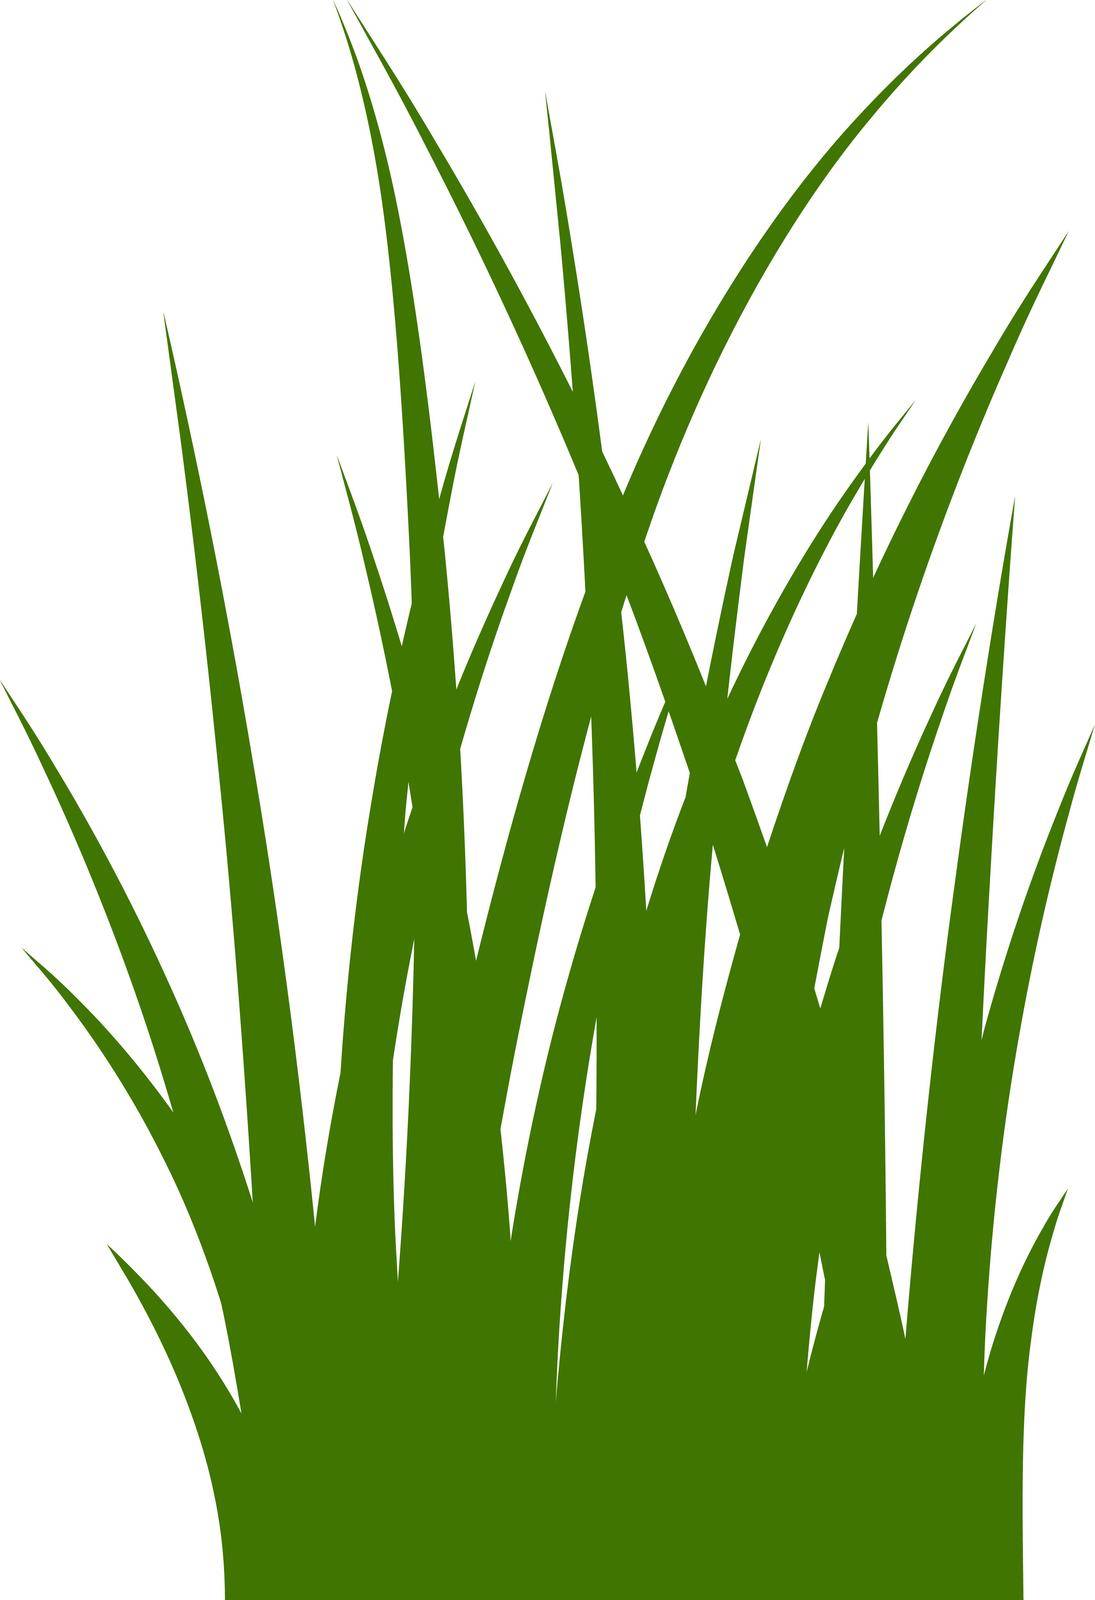 Green grass icon. Long blade leaves silhouette by MicroOne